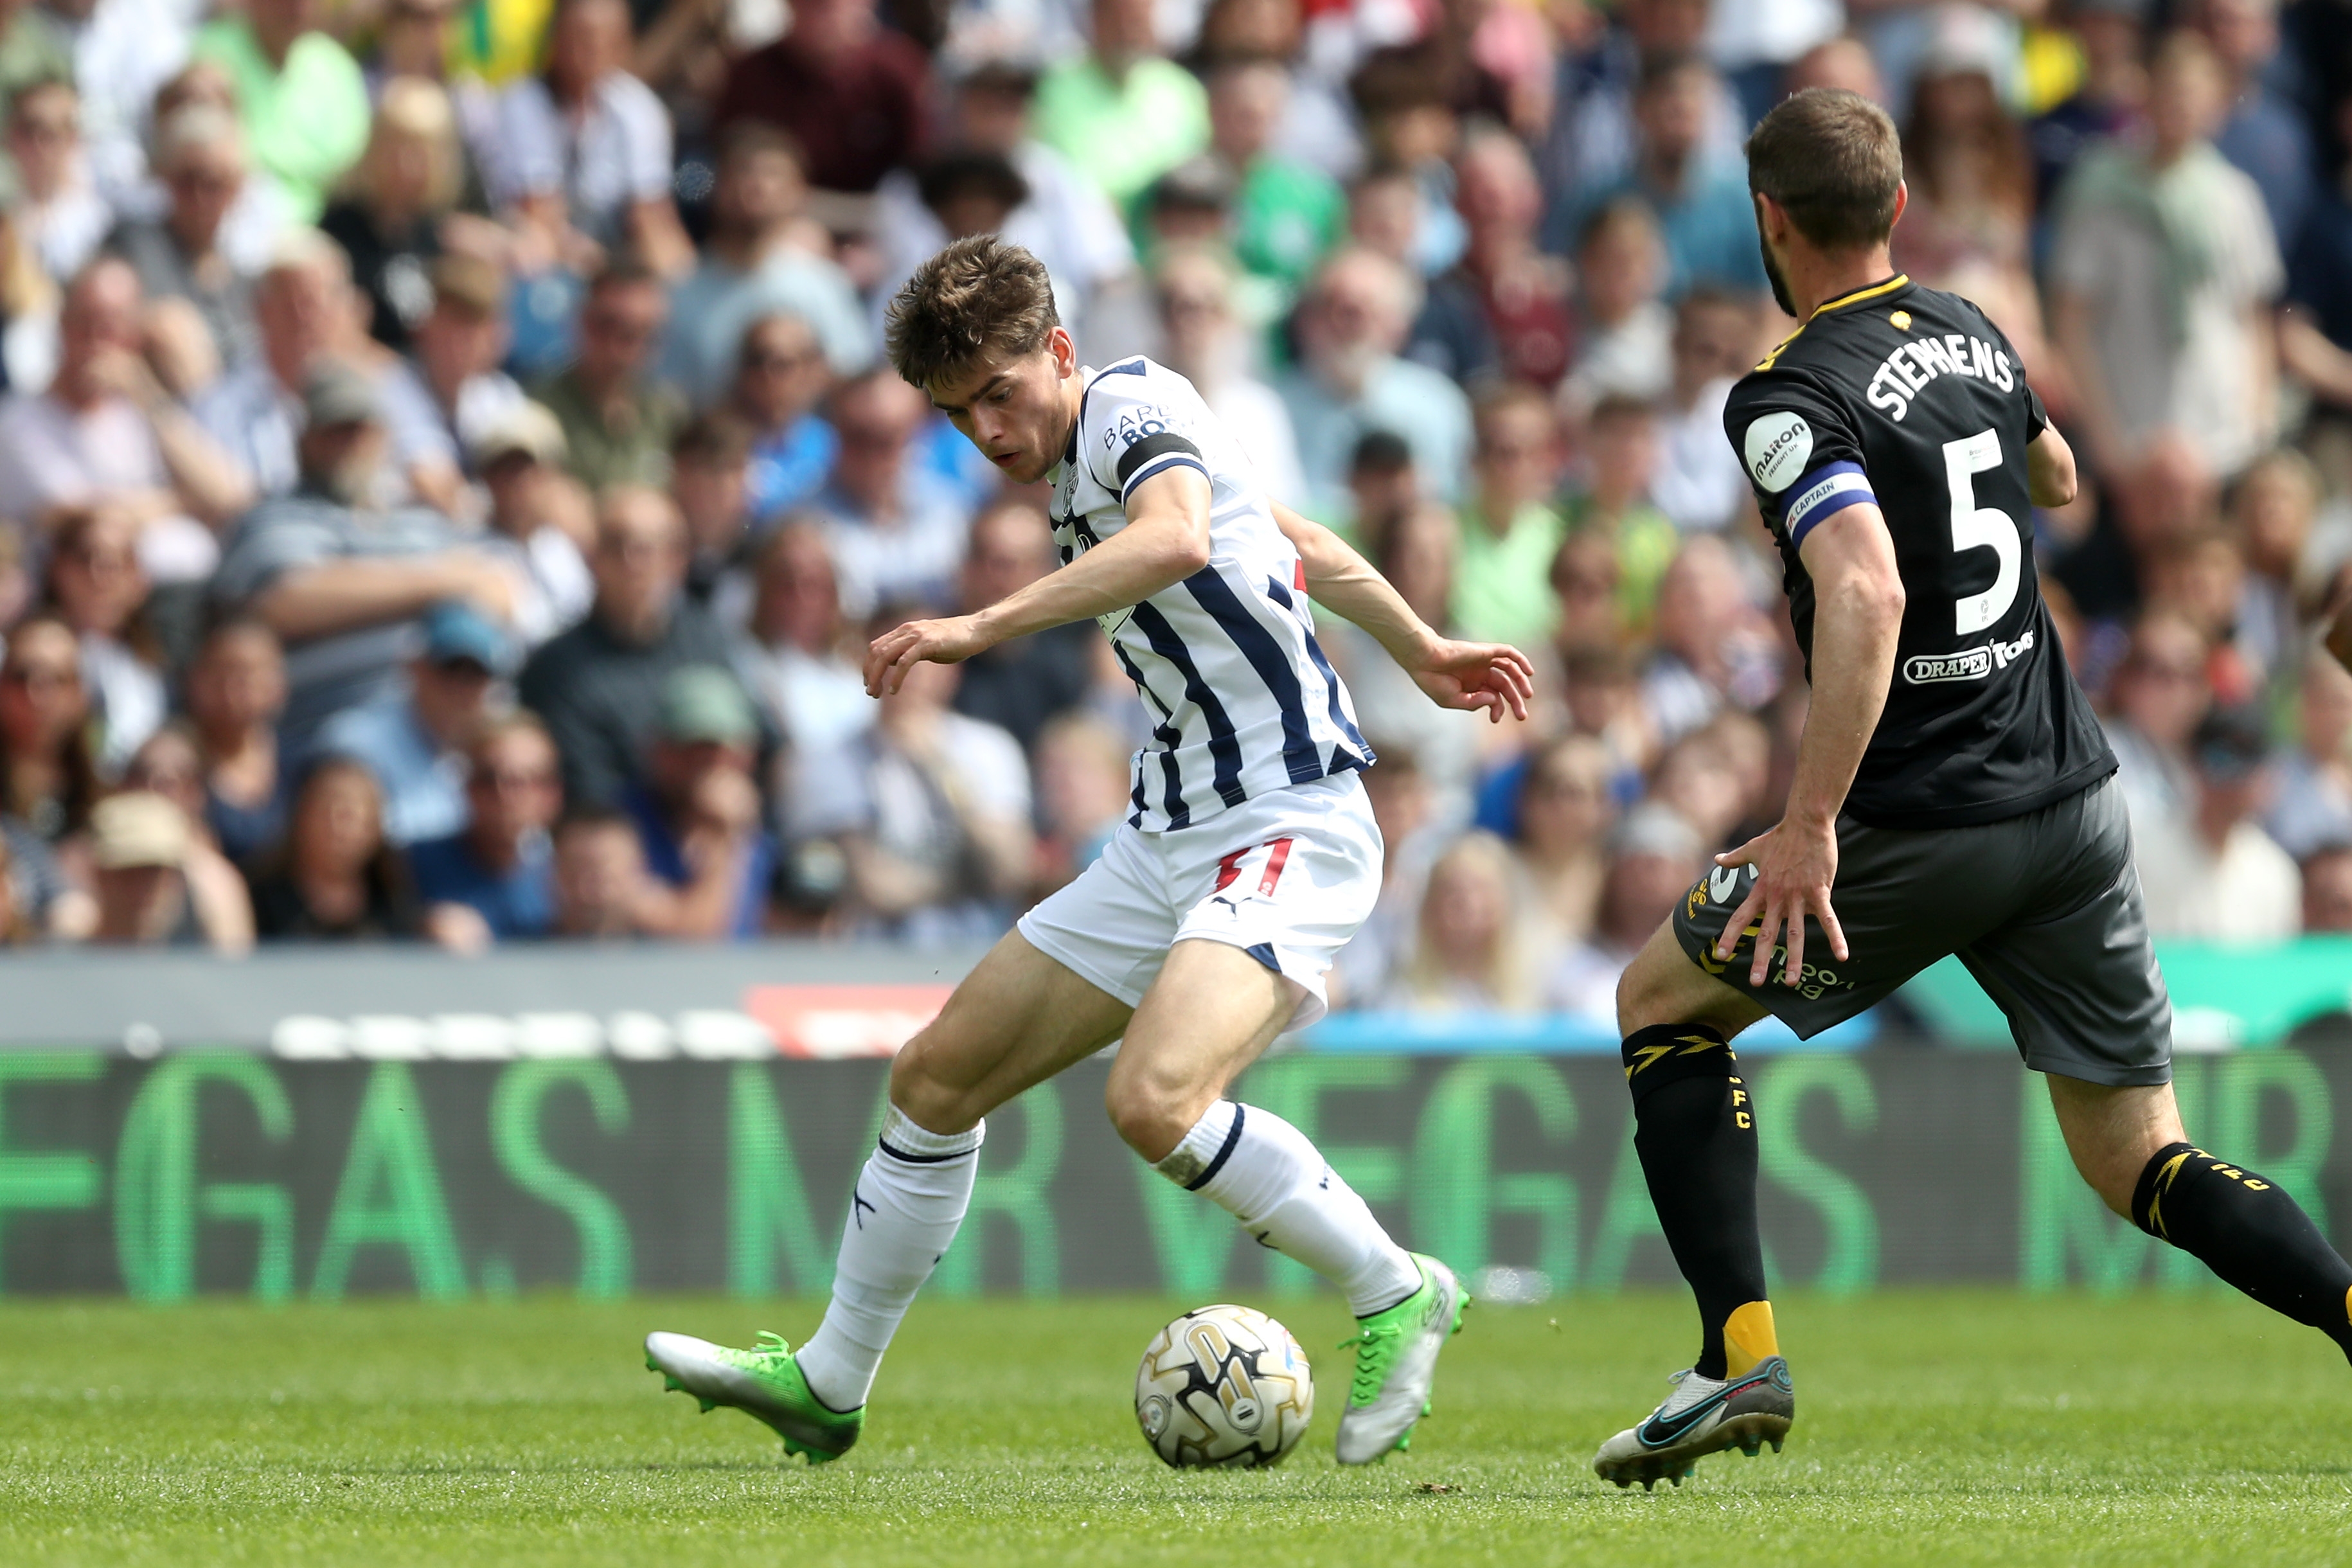 Tom Fellows on the ball against Southampton at The Hawthorns